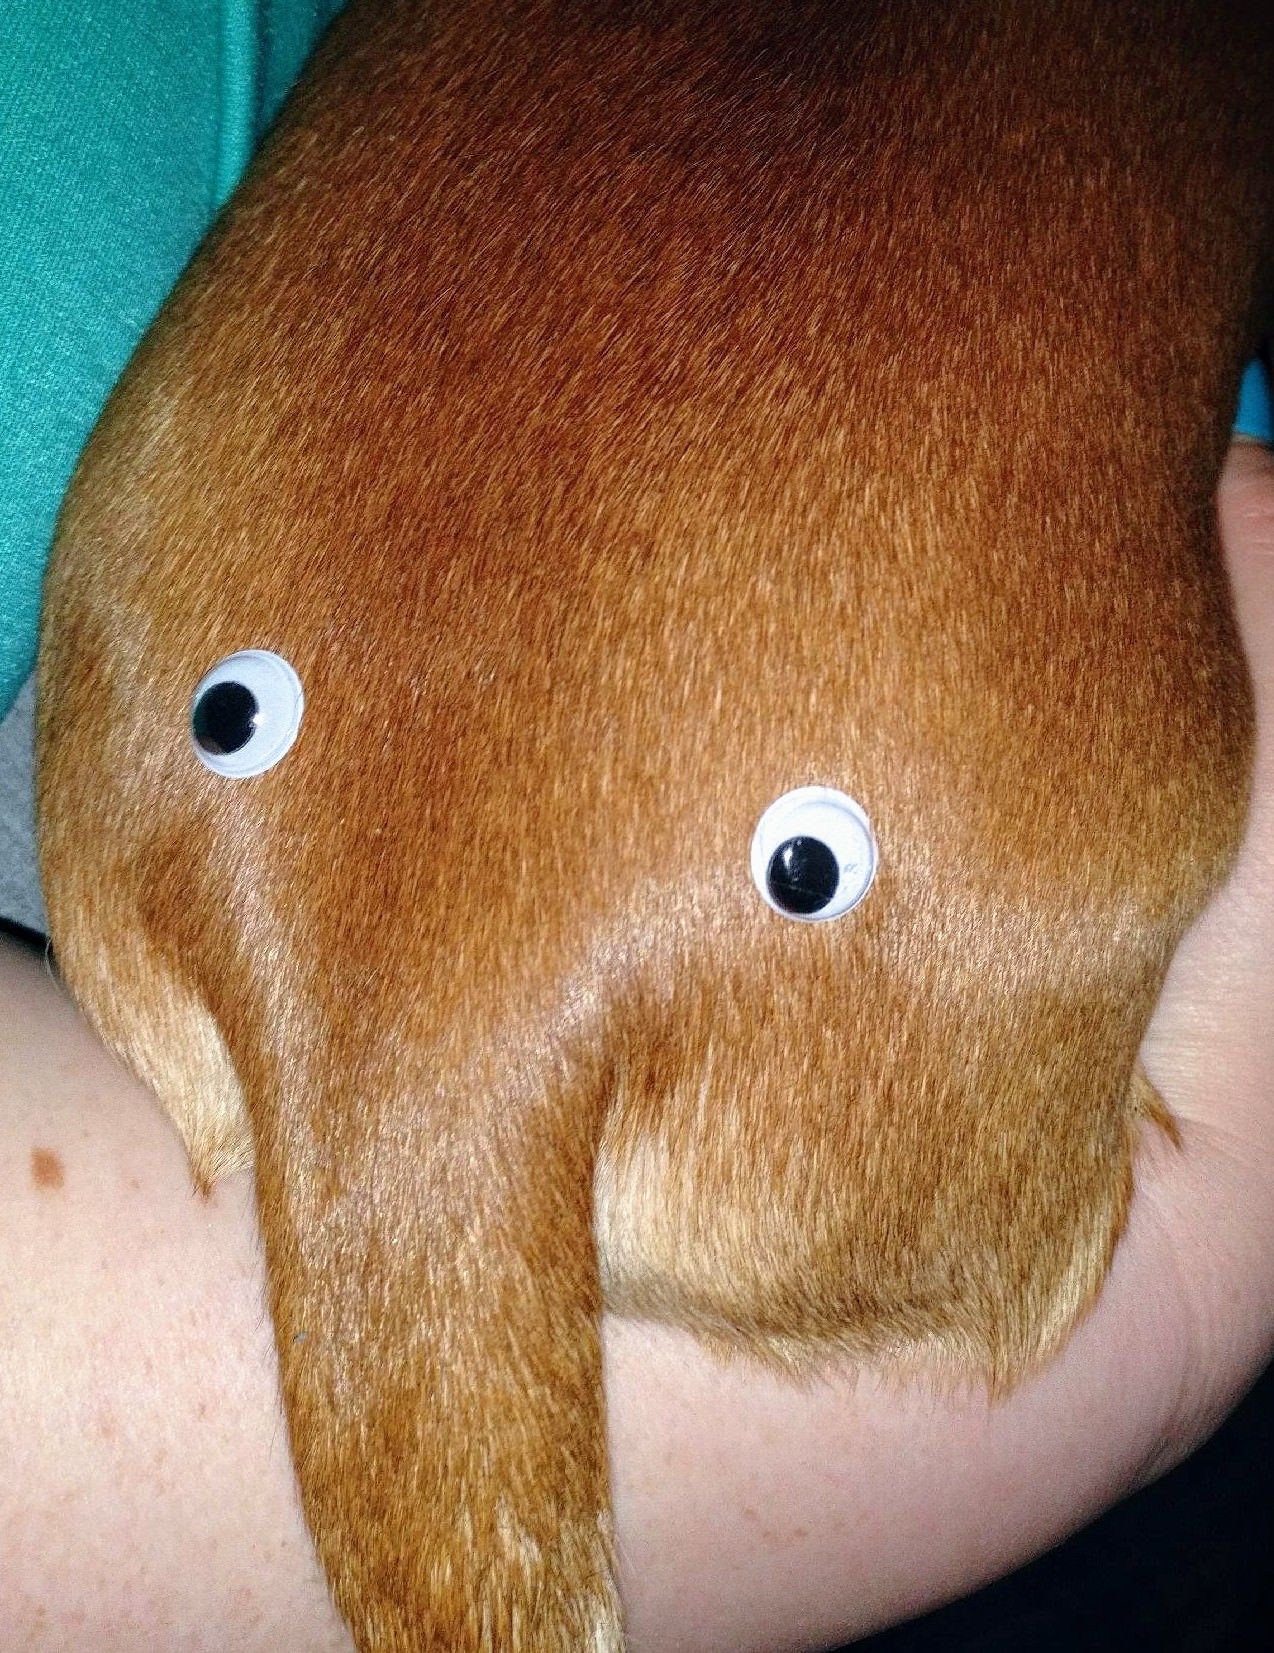 My boyfriend ordered 500 googly eyes "for reasons" and this is one of the first things he did.